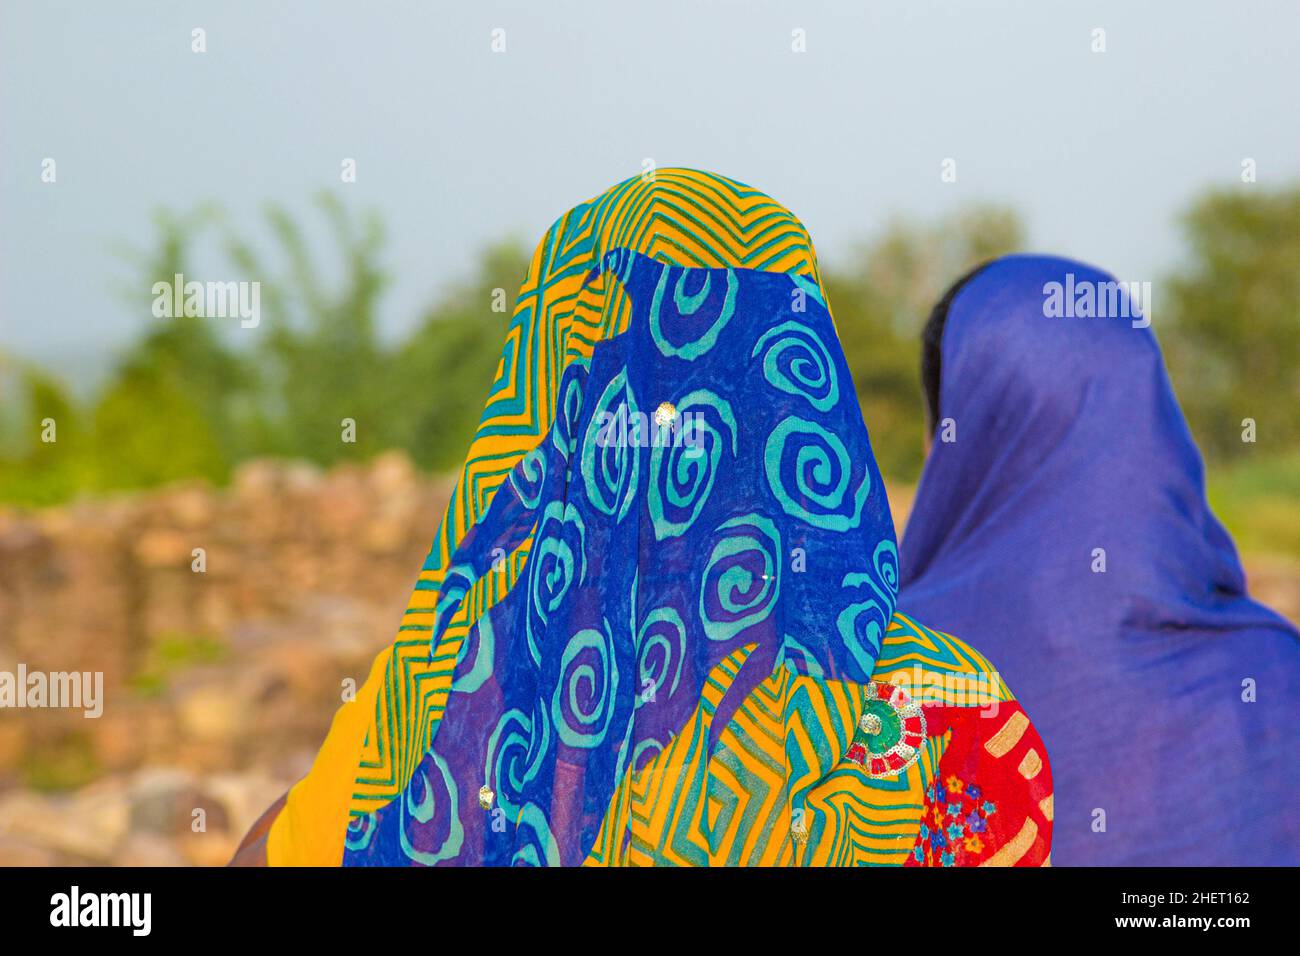 women wear the colorful headscarfs with traditional pattern in the heat of india but without covering the face Stock Photo